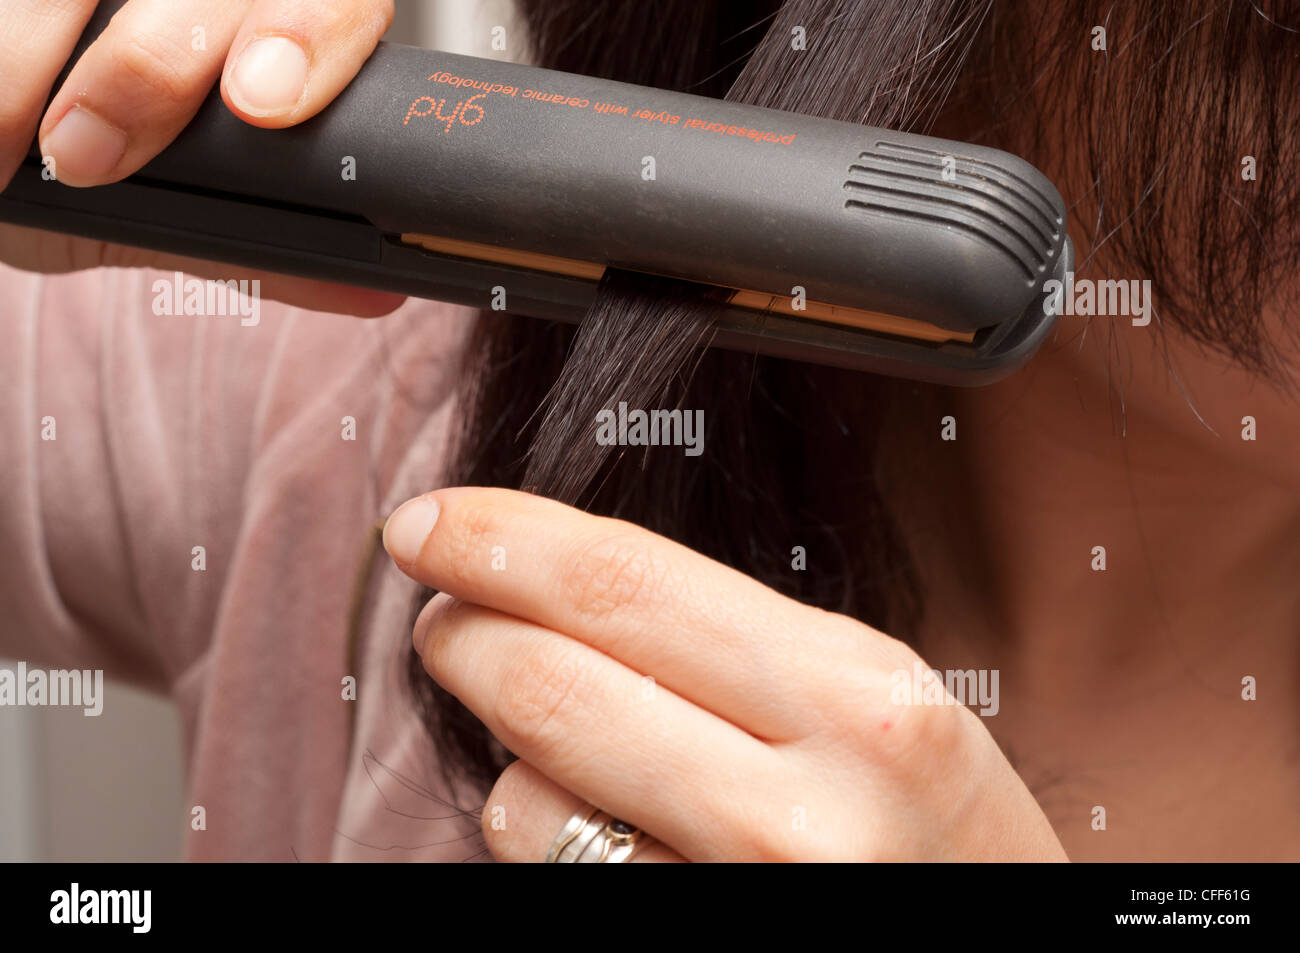 Woman using hair straighteners to style her hair. Stock Photo